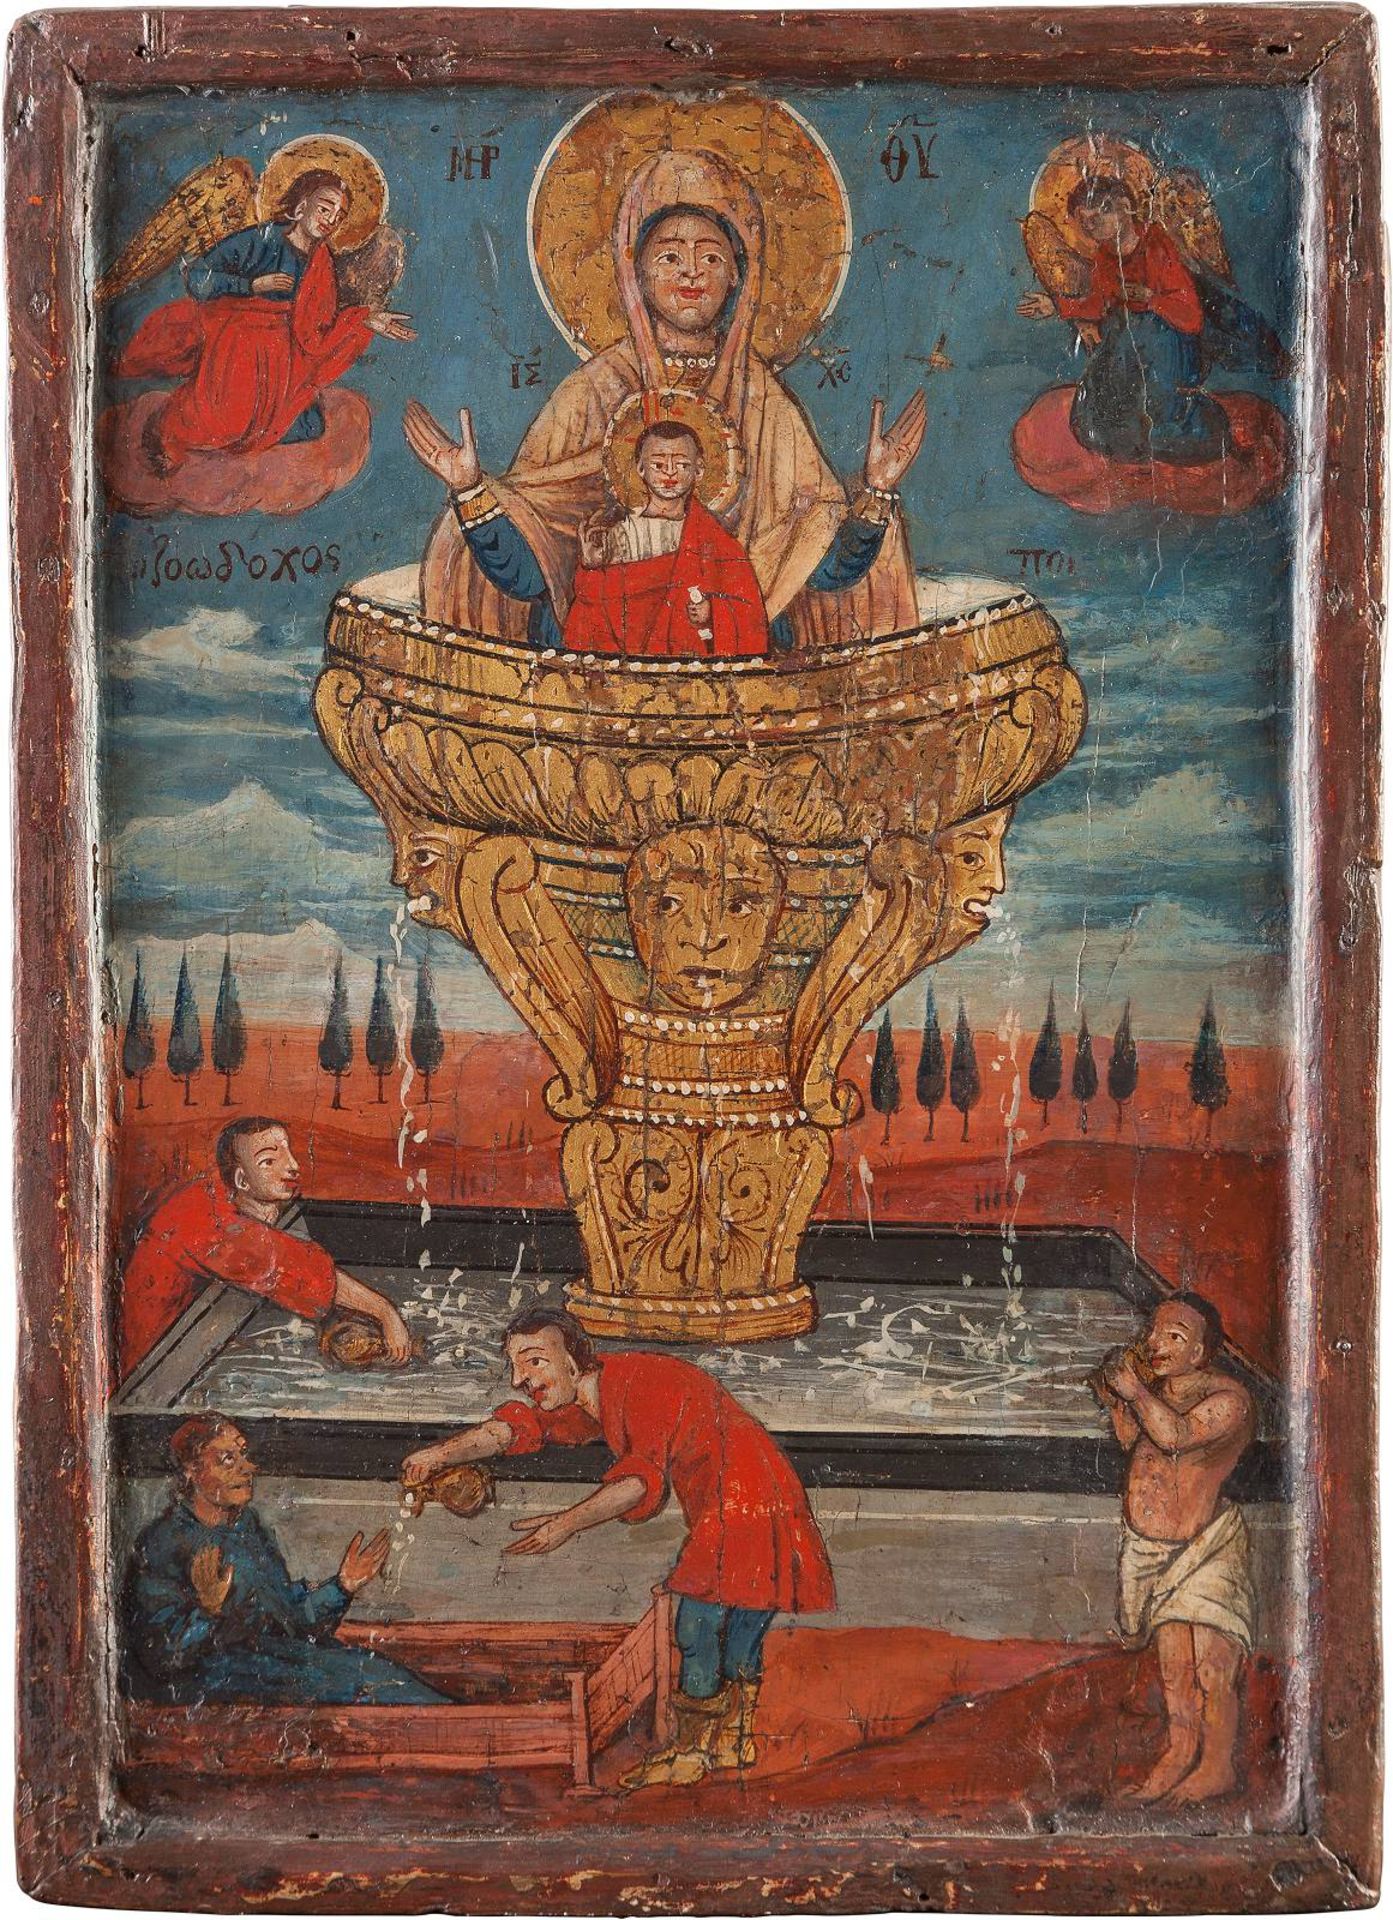 A SMALL ICON SHOWING THE MOTHER OF THE LIFE-GIVING SOURCEGreek, 19th century Tempera on wood